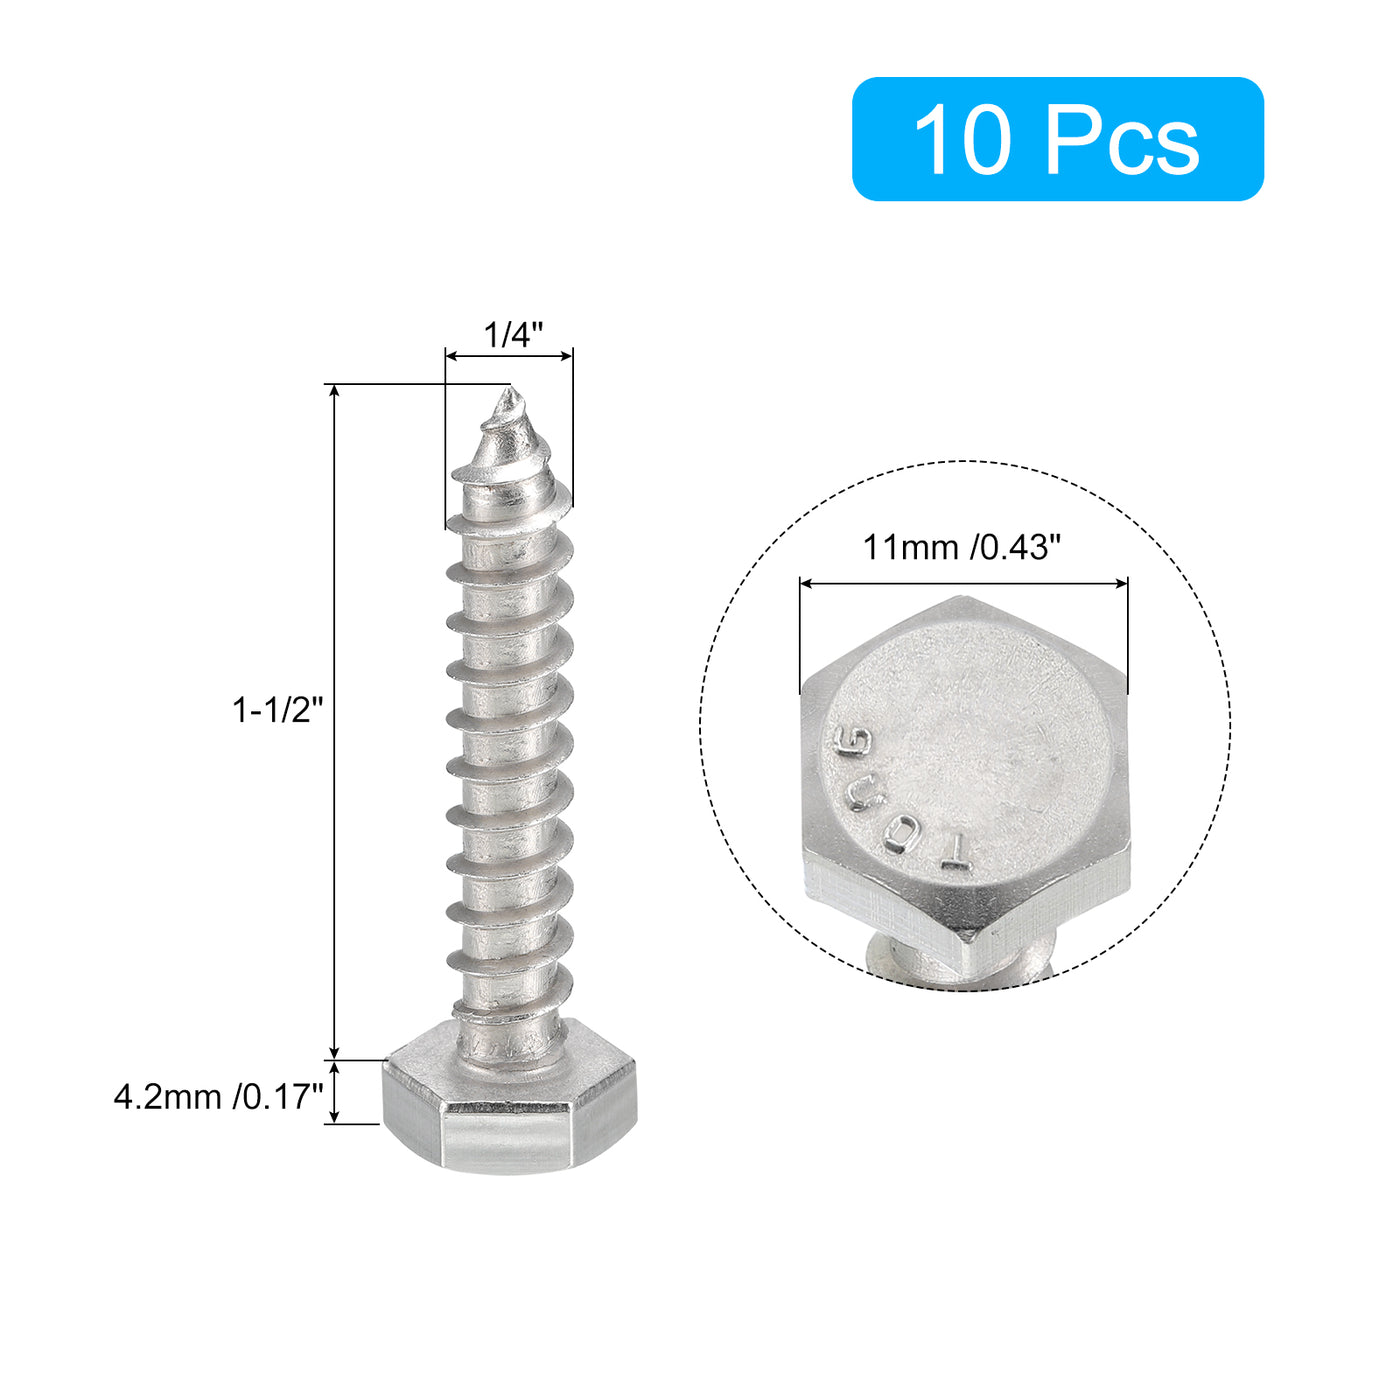 uxcell Uxcell Hex Head Lag Screws Bolts, 10pcs 1/4" x 1-1/2" 304 Stainless Steel Wood Screws